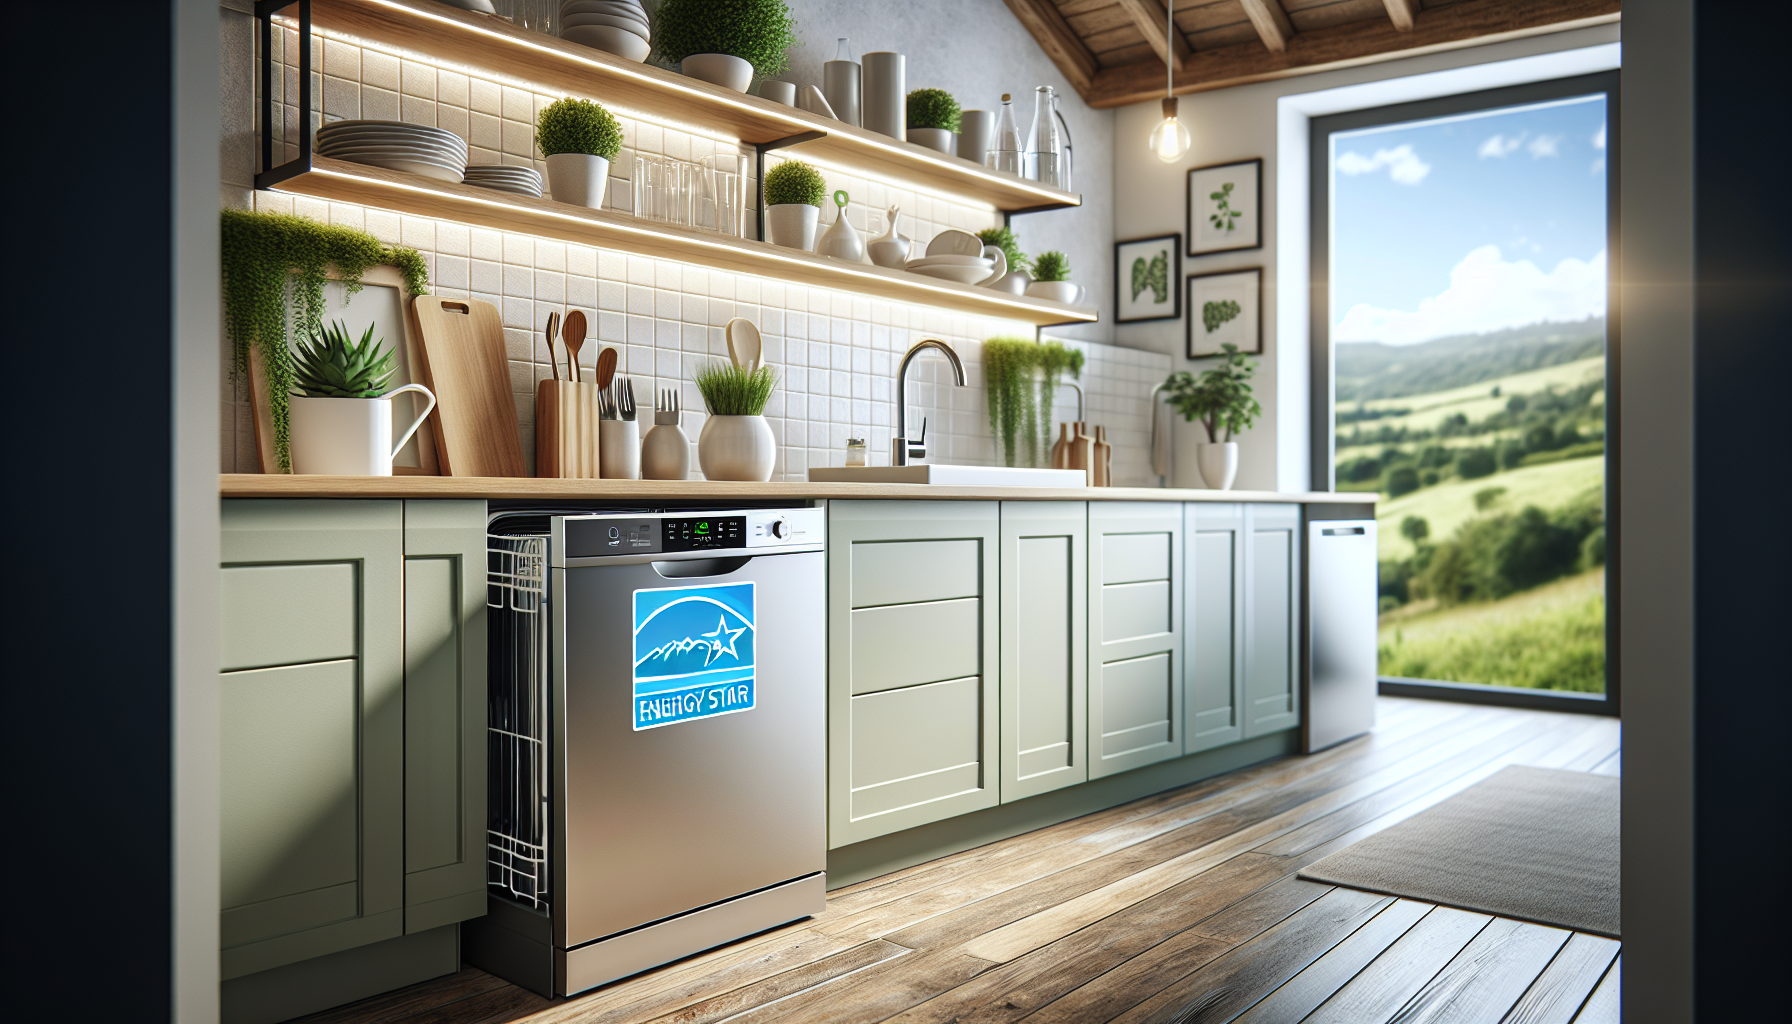 How To Choose A Dishwasher That Is Eco-friendly